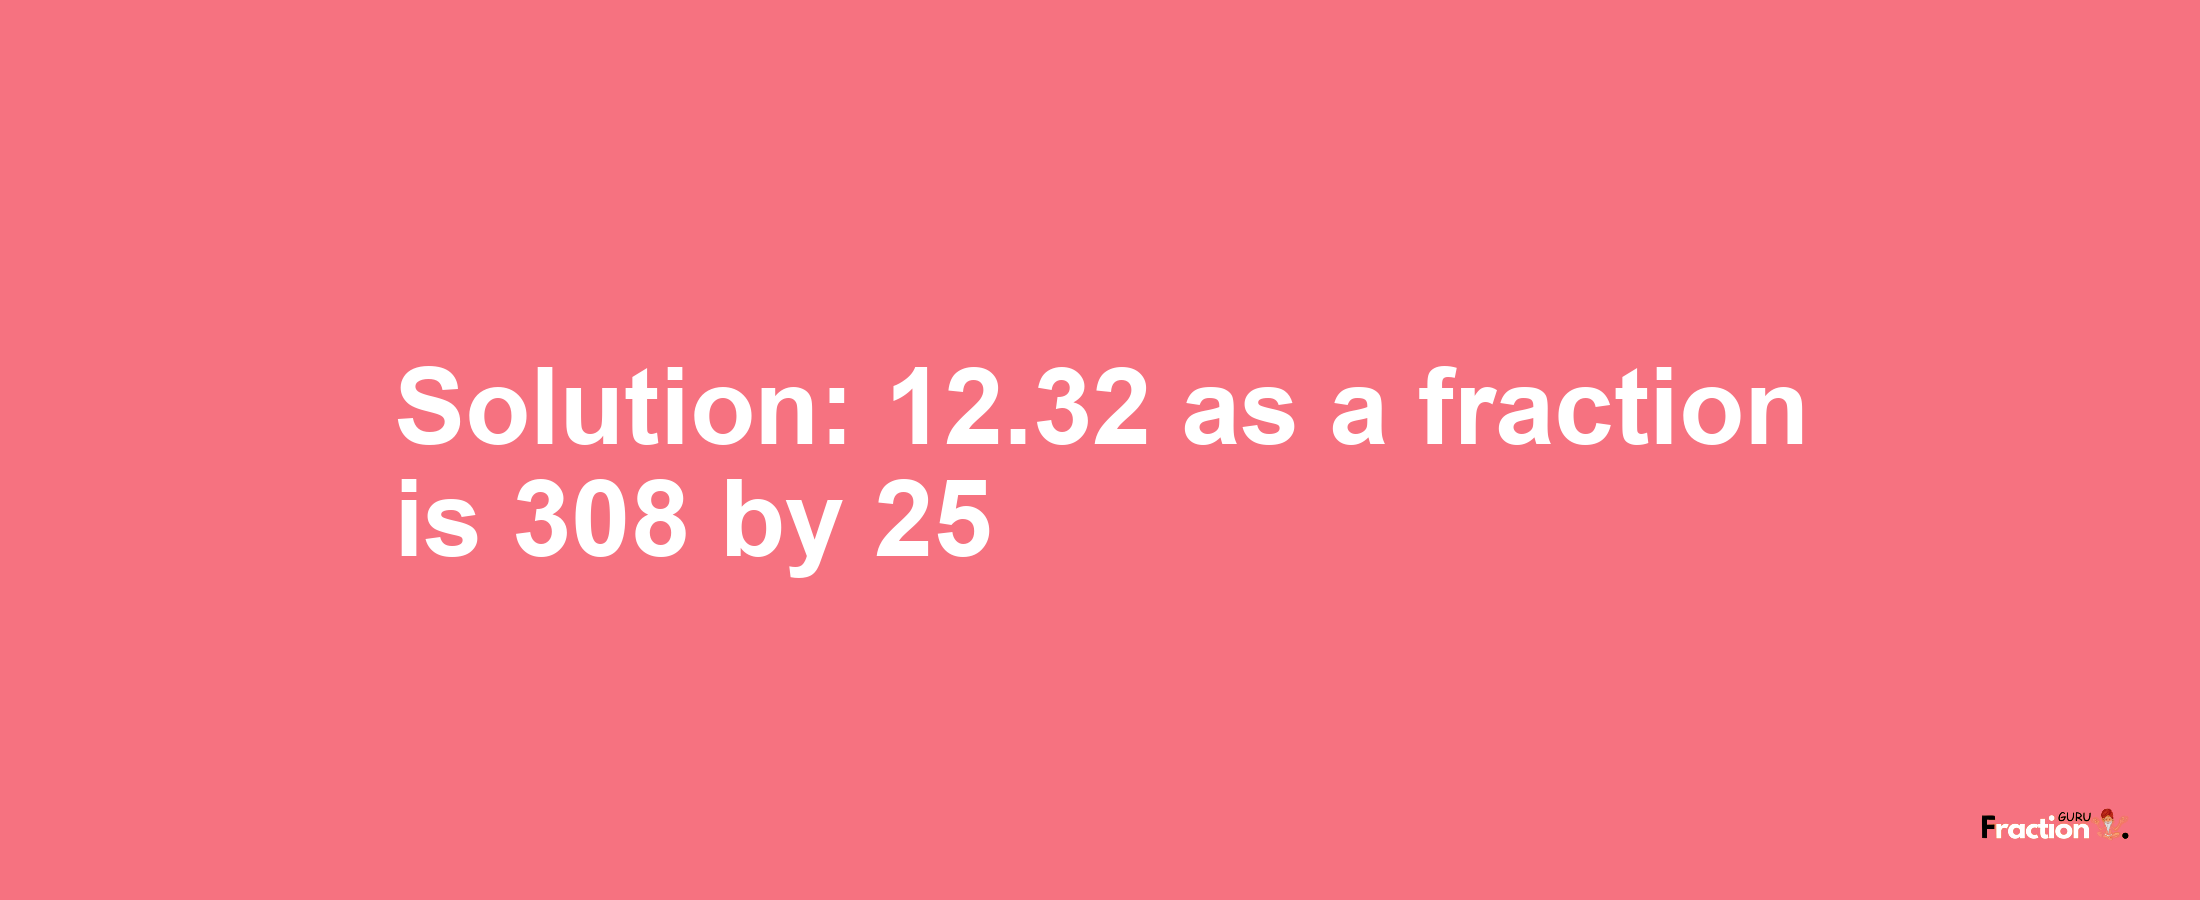 Solution:12.32 as a fraction is 308/25